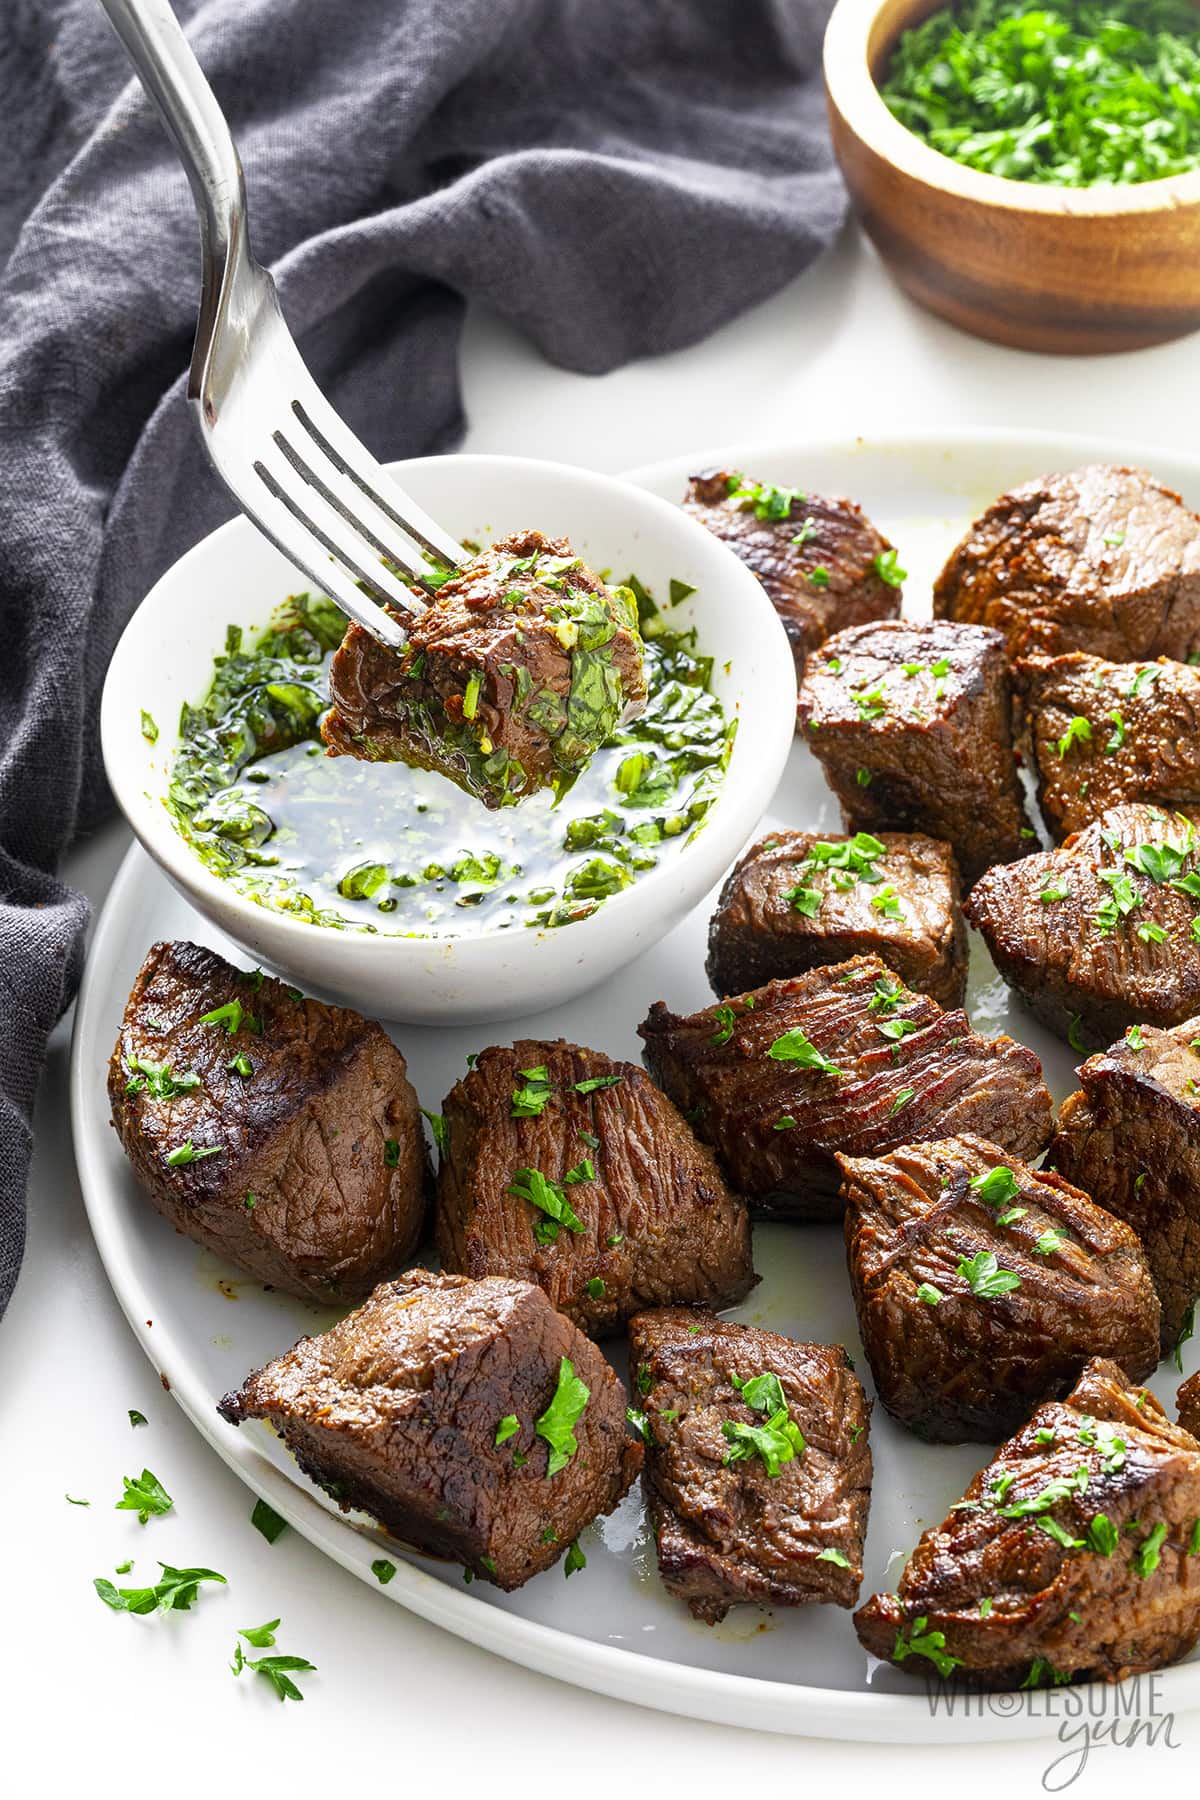 Sirloin steak tips dipped in chimichurri sauce on a plate.